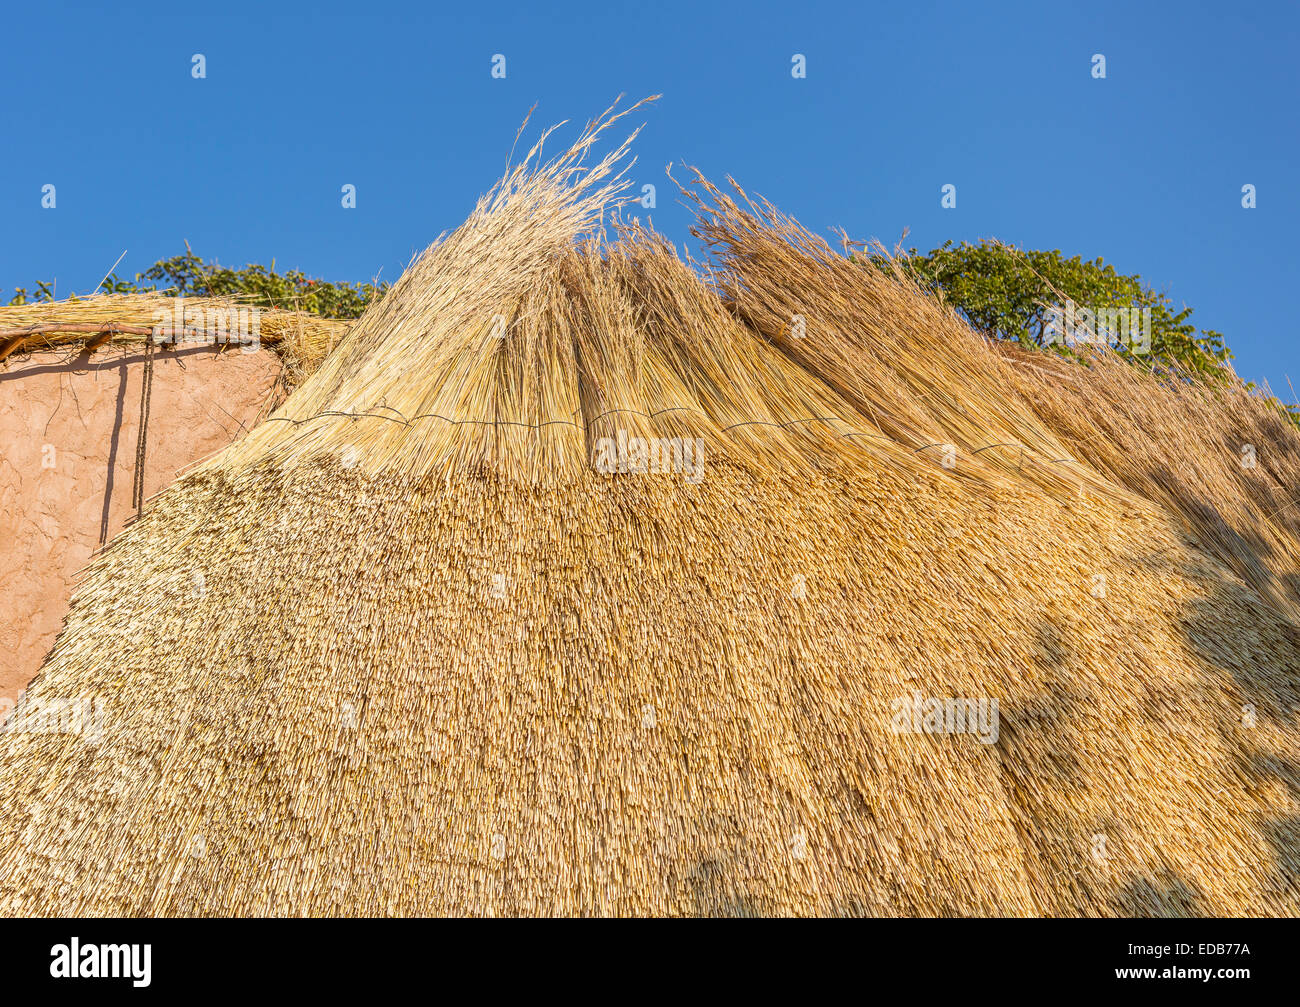 SWAZILAND, AFRICA - Roof construction of a traditional beehive hut made of thatched dry grass, at the Phophonyane Nature Reserve Stock Photo